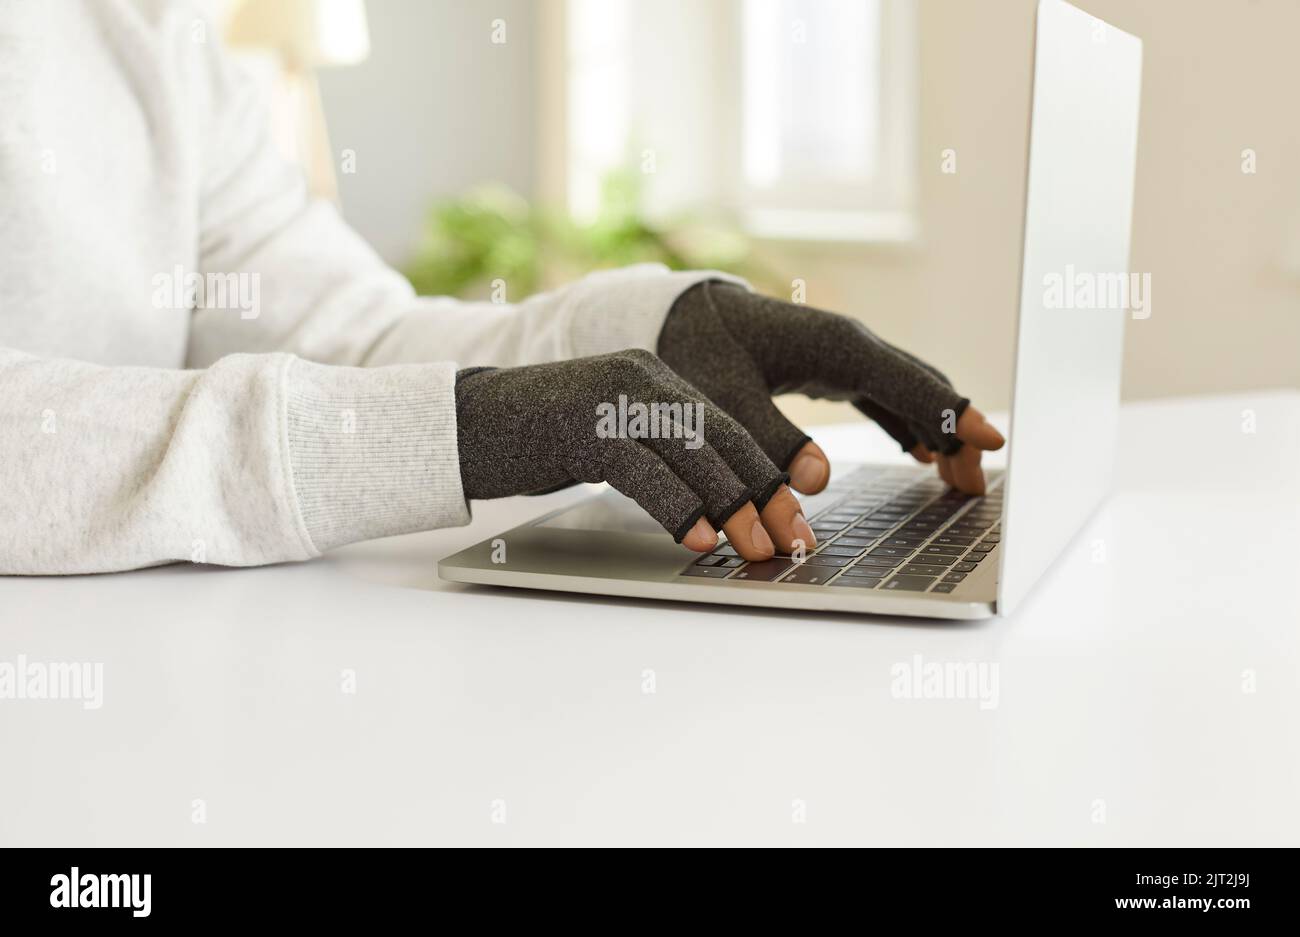 Man with rheumatoid arthritis types text on laptop wearing special compression gloves. Stock Photo